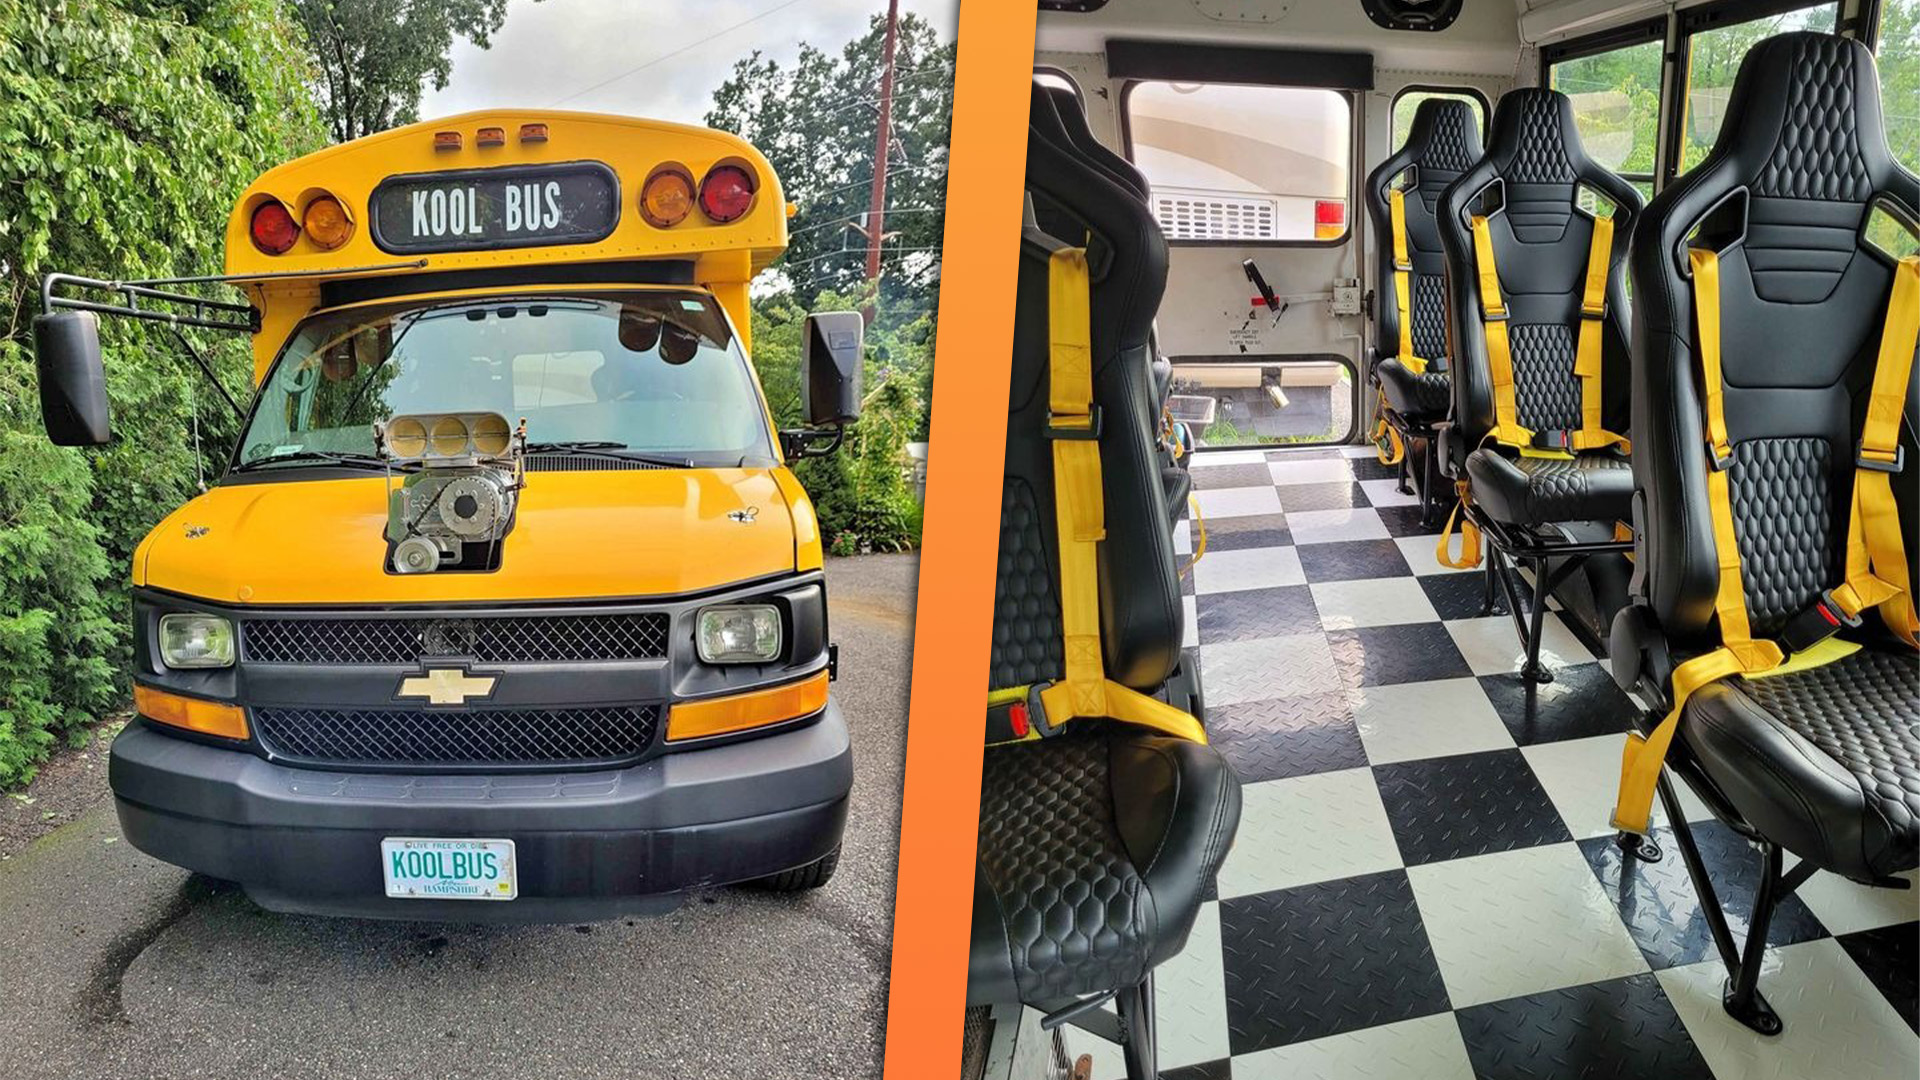 Hot Rod Chevy Bus With a Blower and Seven Racing Seats Makes Back to School Fun